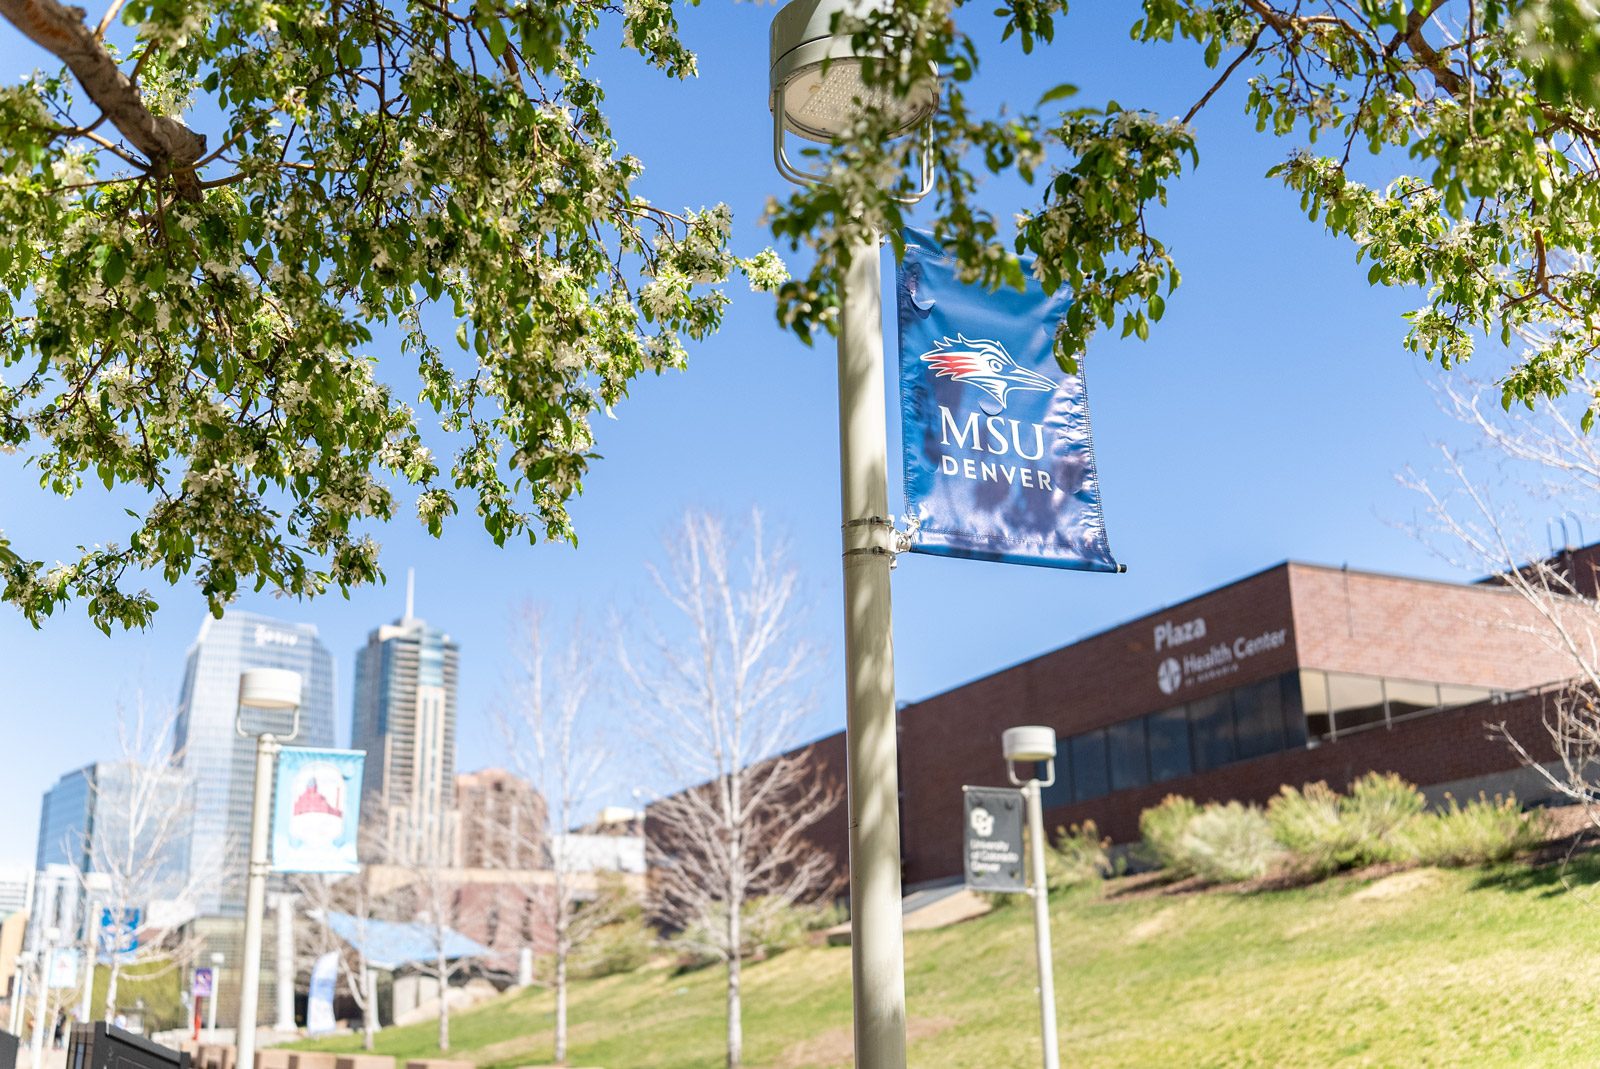 Budding trees on campus with a blue MSU Denver banner and the Plaza Building in the background